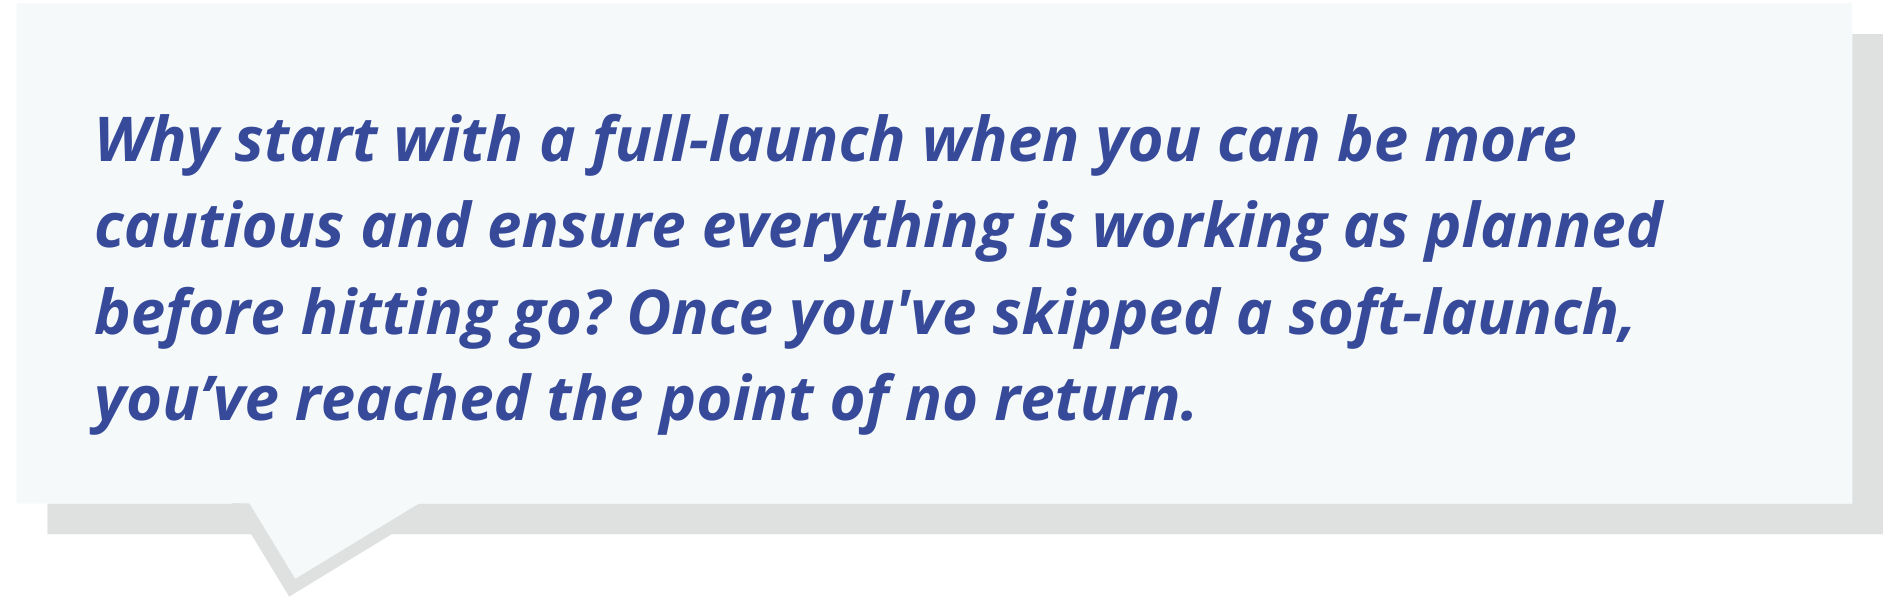 Quote Text: Why start with a full-launch when you can be more cautious and ensure everything is working as planned before hitting go? Once you've skipped a soft-launch, you’ve reached the point of no return.